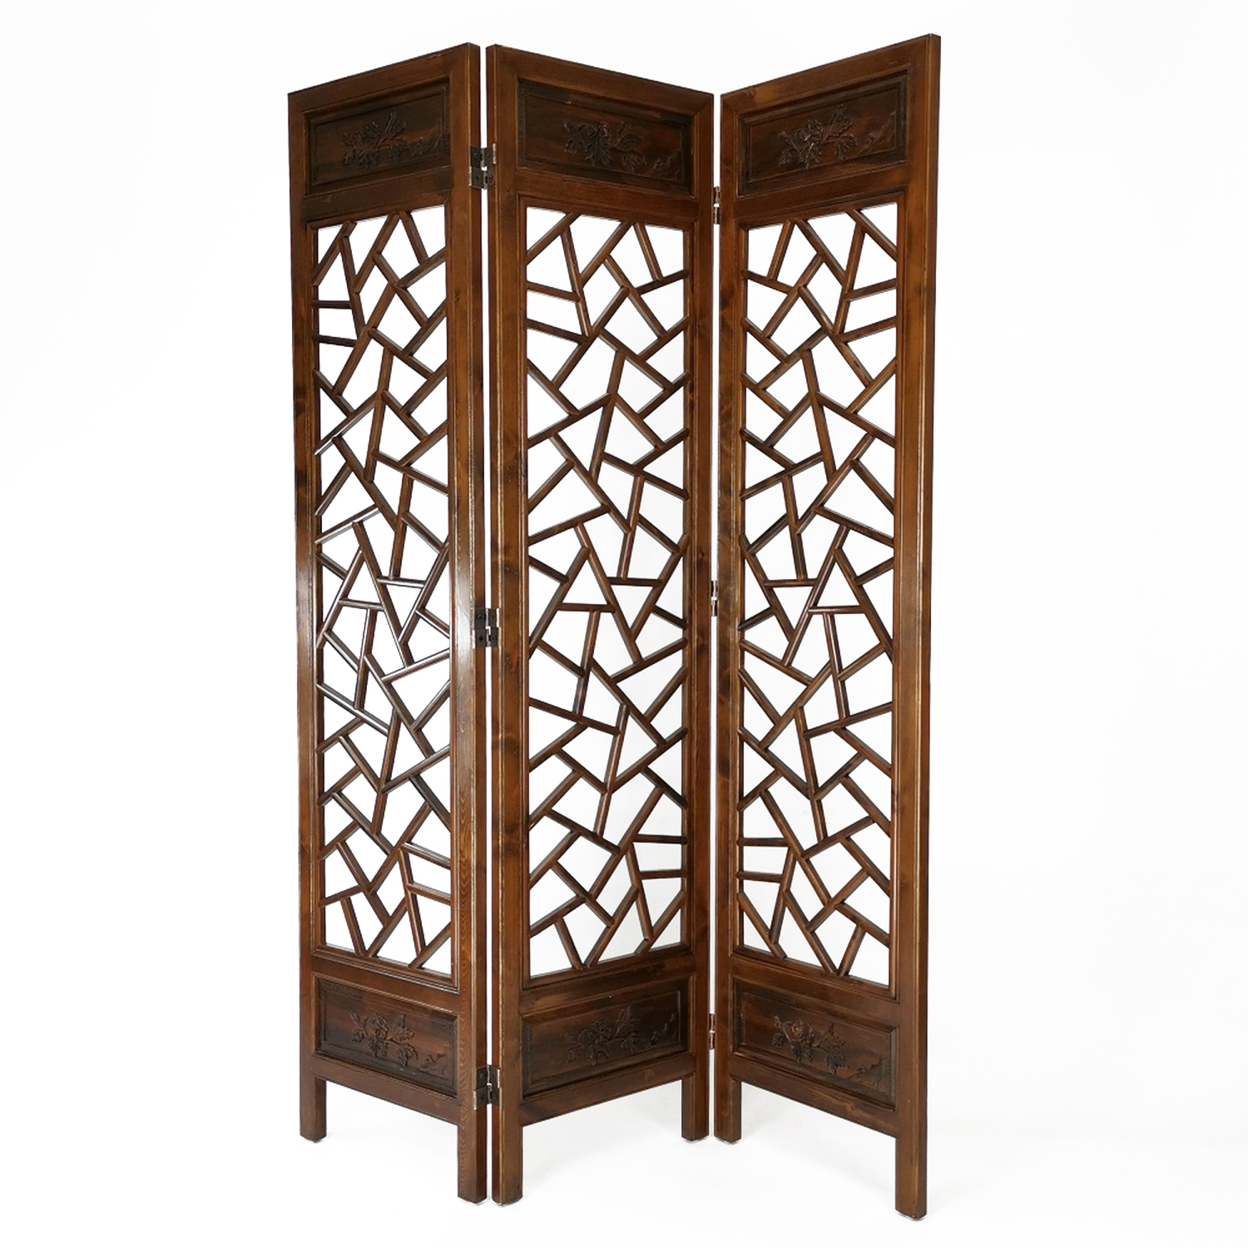 3 Mirrored Panel Screen With Abstract Cut Out Pattern, Brown- Saltoro Sherpi